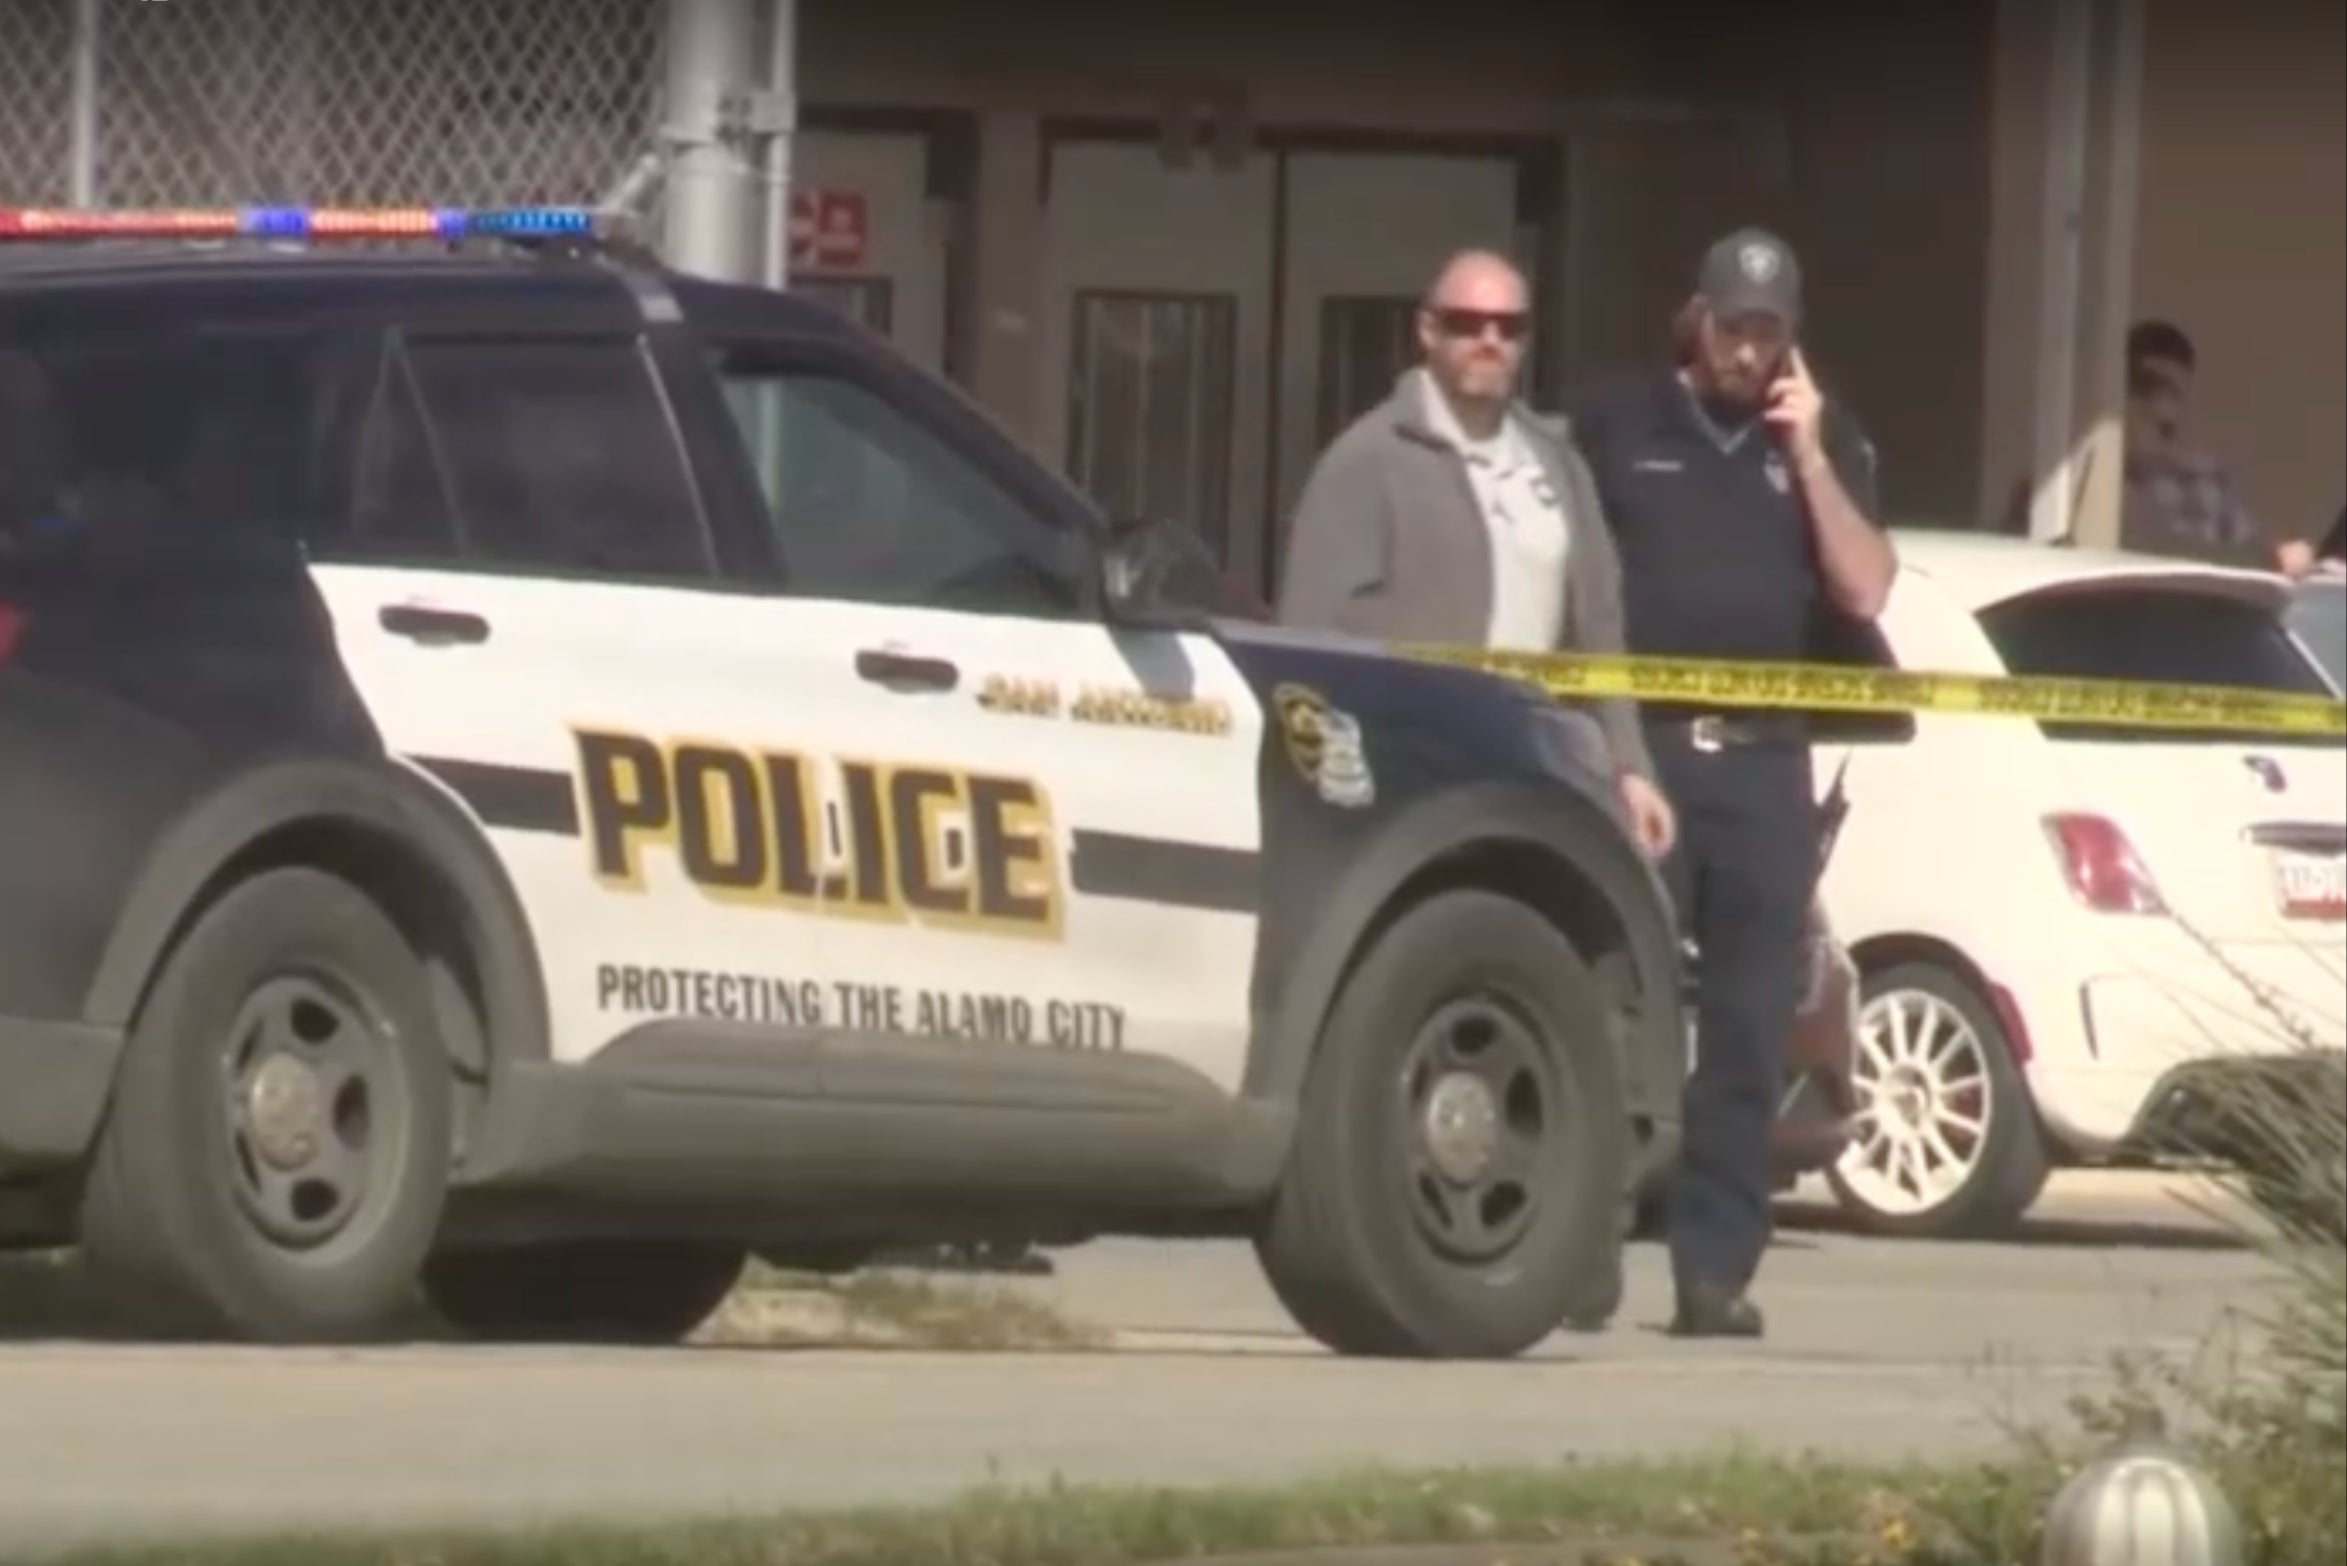 A man has died following a ‘love triangle’ shooting outside a post office in Texas